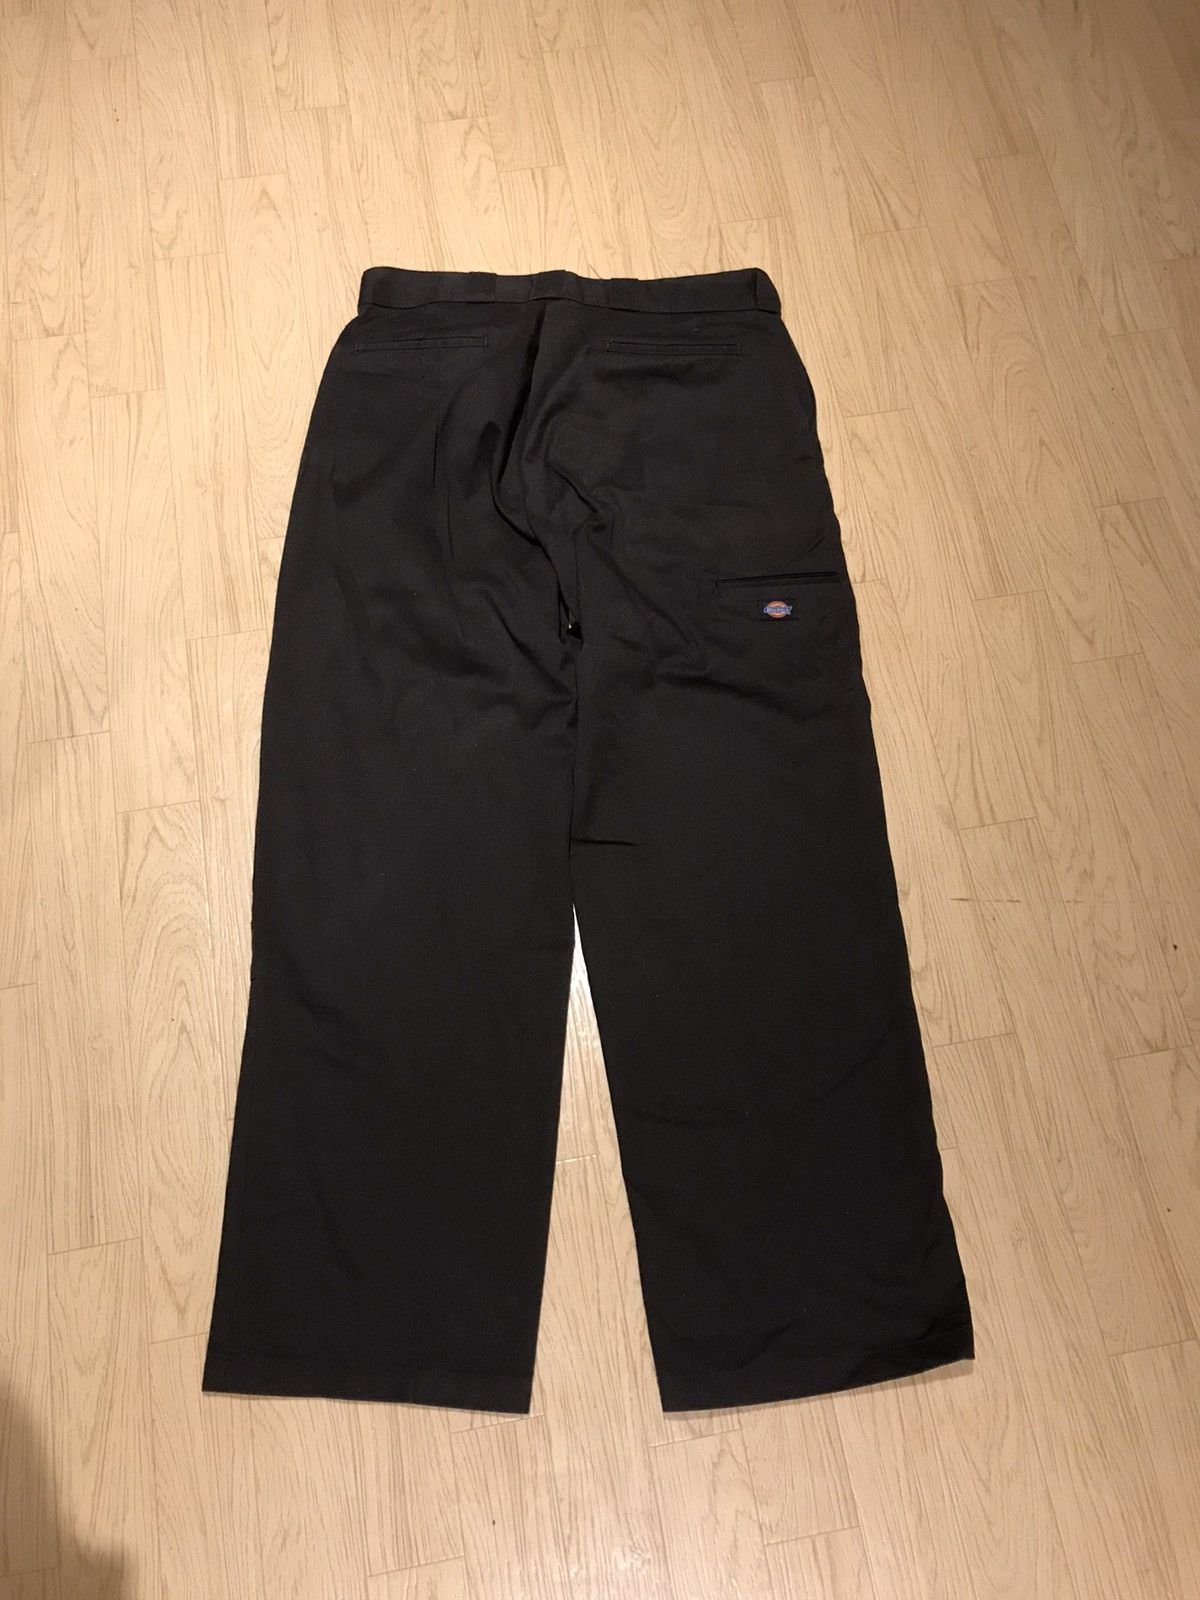 Dickies Authentic Brown Dickie’s Pants Size US 36 / EU 52 - 3 Thumbnail